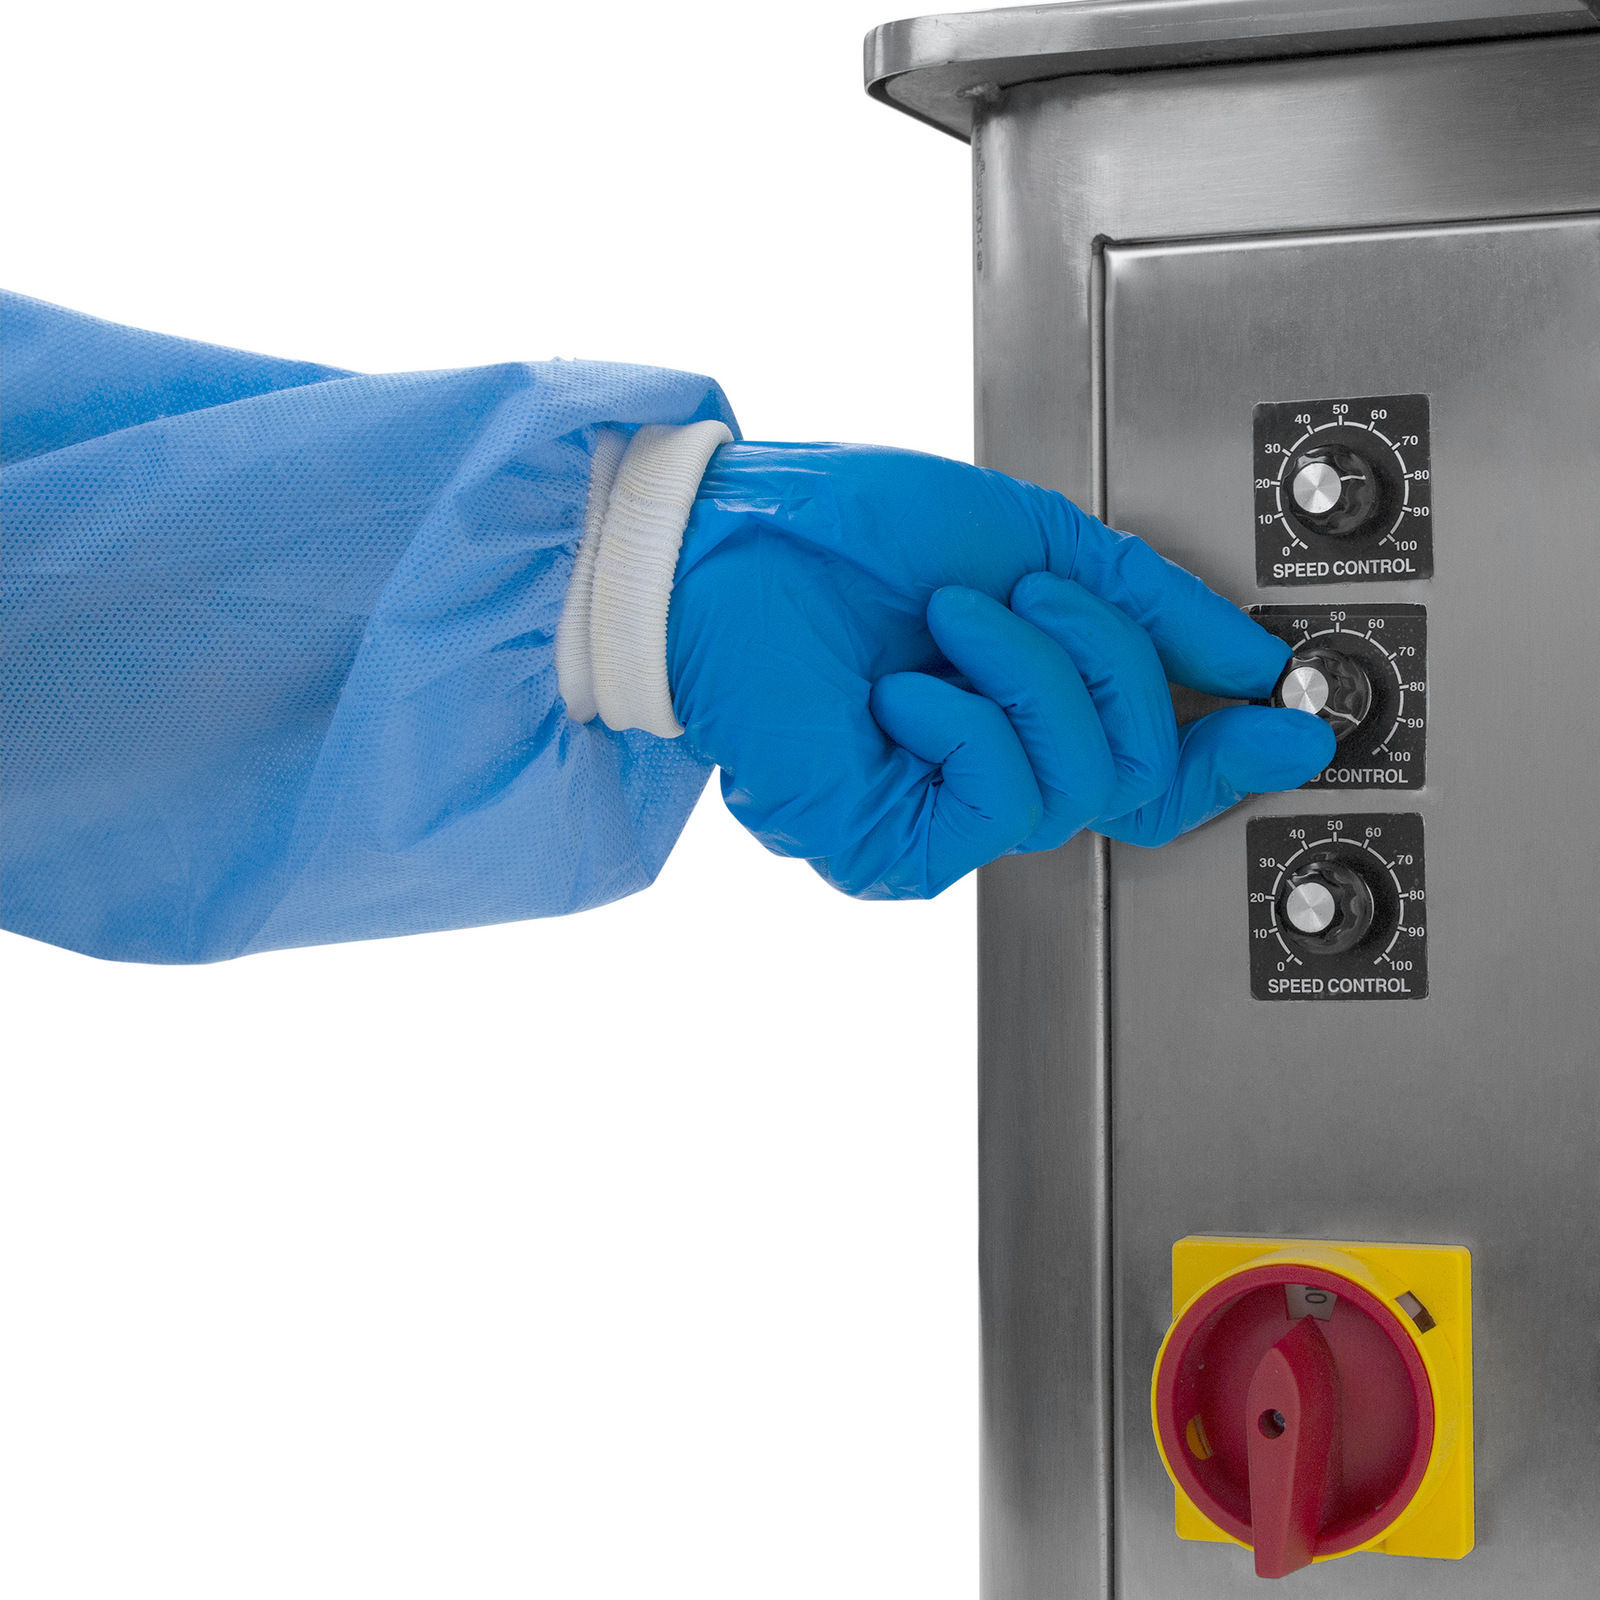 operator wearing blue gloves adjusting black knobs on stainless steel automatic label applicator